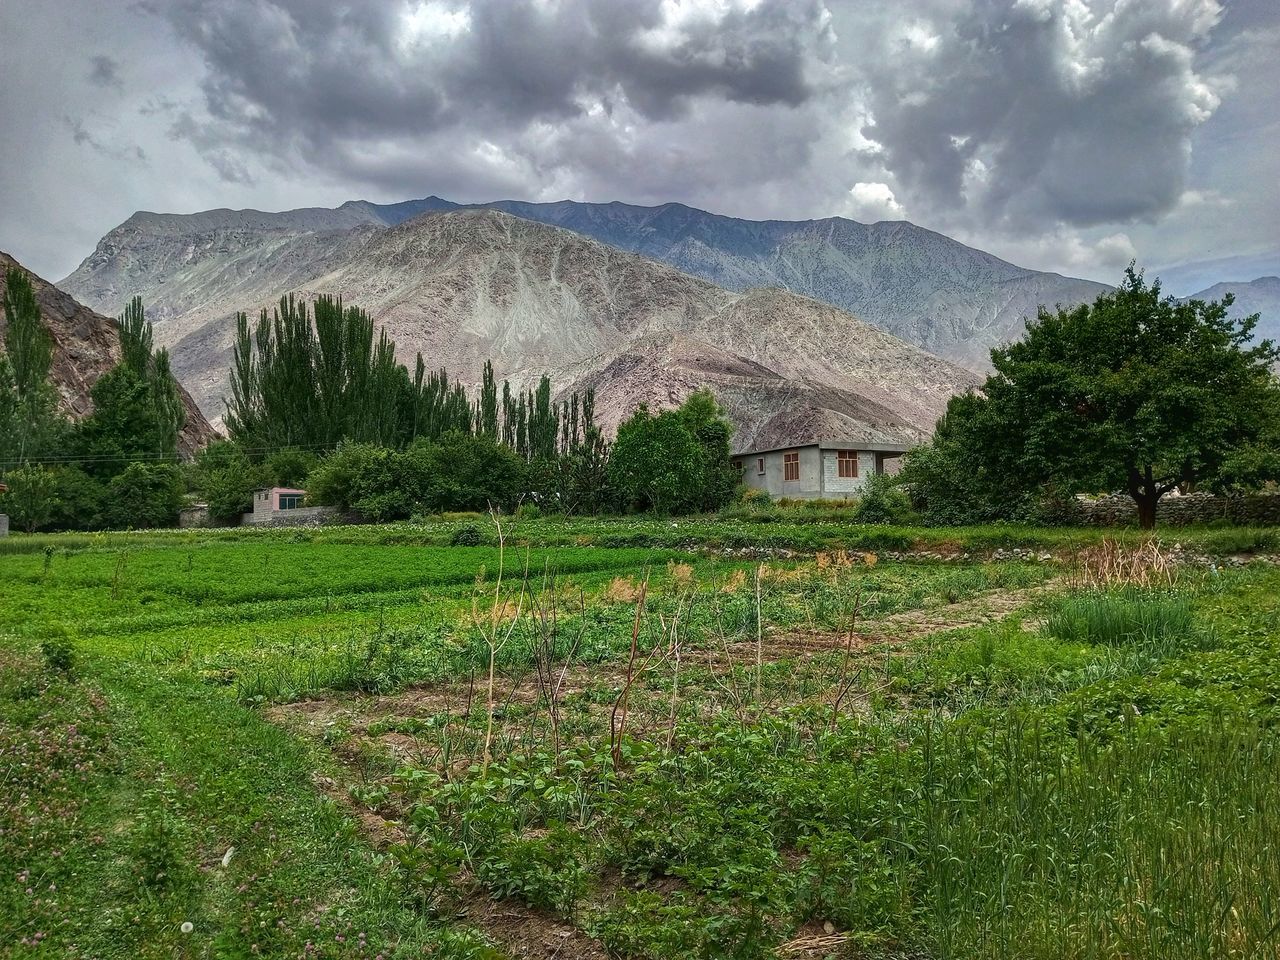 mountain, plant, landscape, cloud, environment, sky, land, scenics - nature, nature, valley, mountain range, tree, rural area, meadow, beauty in nature, field, architecture, grass, building, highland, rural scene, flower, plateau, no people, agriculture, green, built structure, house, grassland, growth, building exterior, travel destinations, outdoors, pasture, plain, travel, tranquility, wilderness, farm, crop, overcast, village, tranquil scene